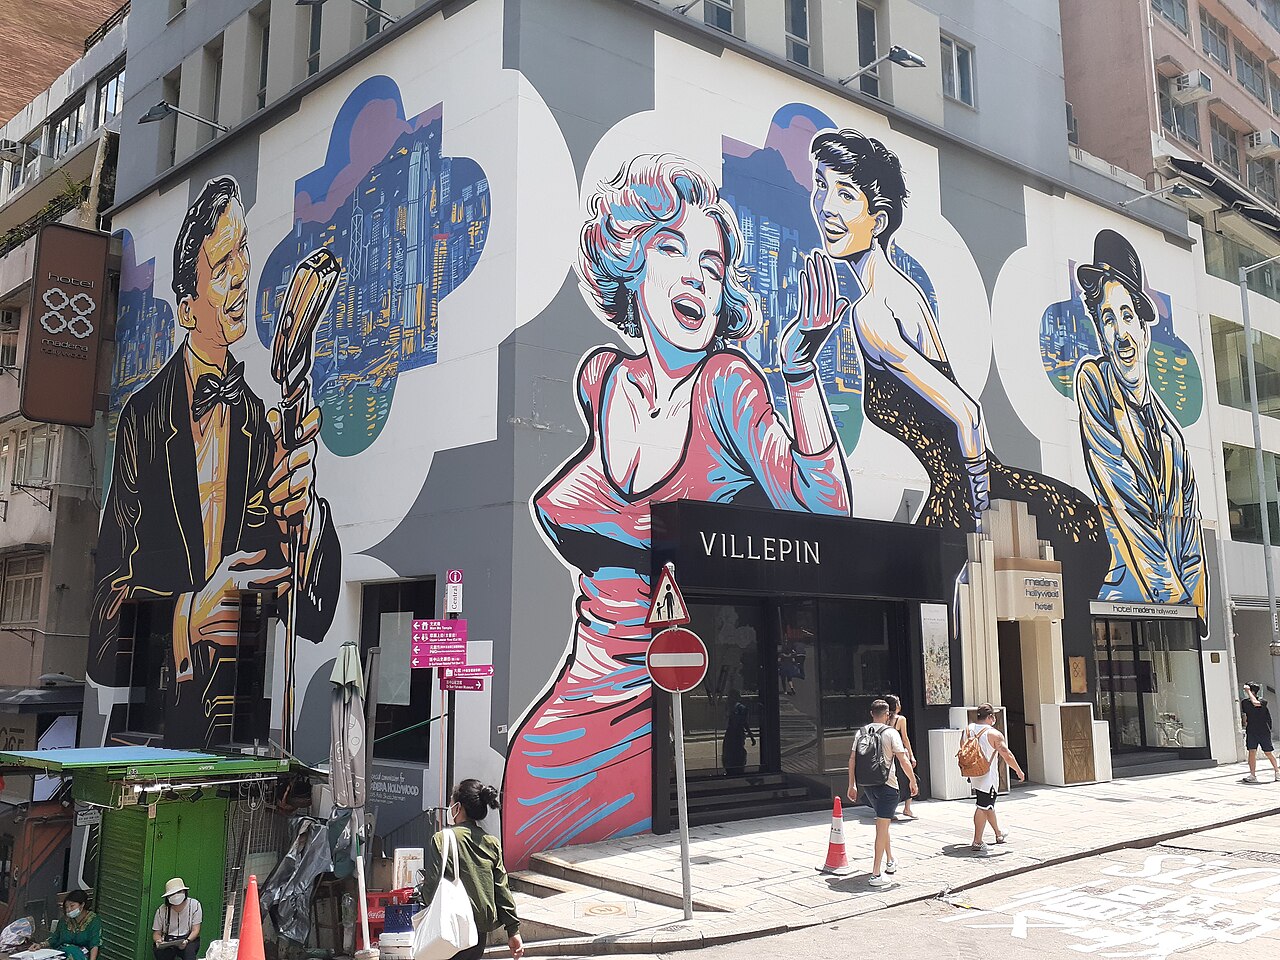 The pop art-style mural on the Hotel Madera Hollywood bears images of (from left to right) Frank Sinatra, Marilyn Monroe, Audrey Hepburn and Charlie Chaplin. The stars are set against the backdrop of Hong Kong's skyline.